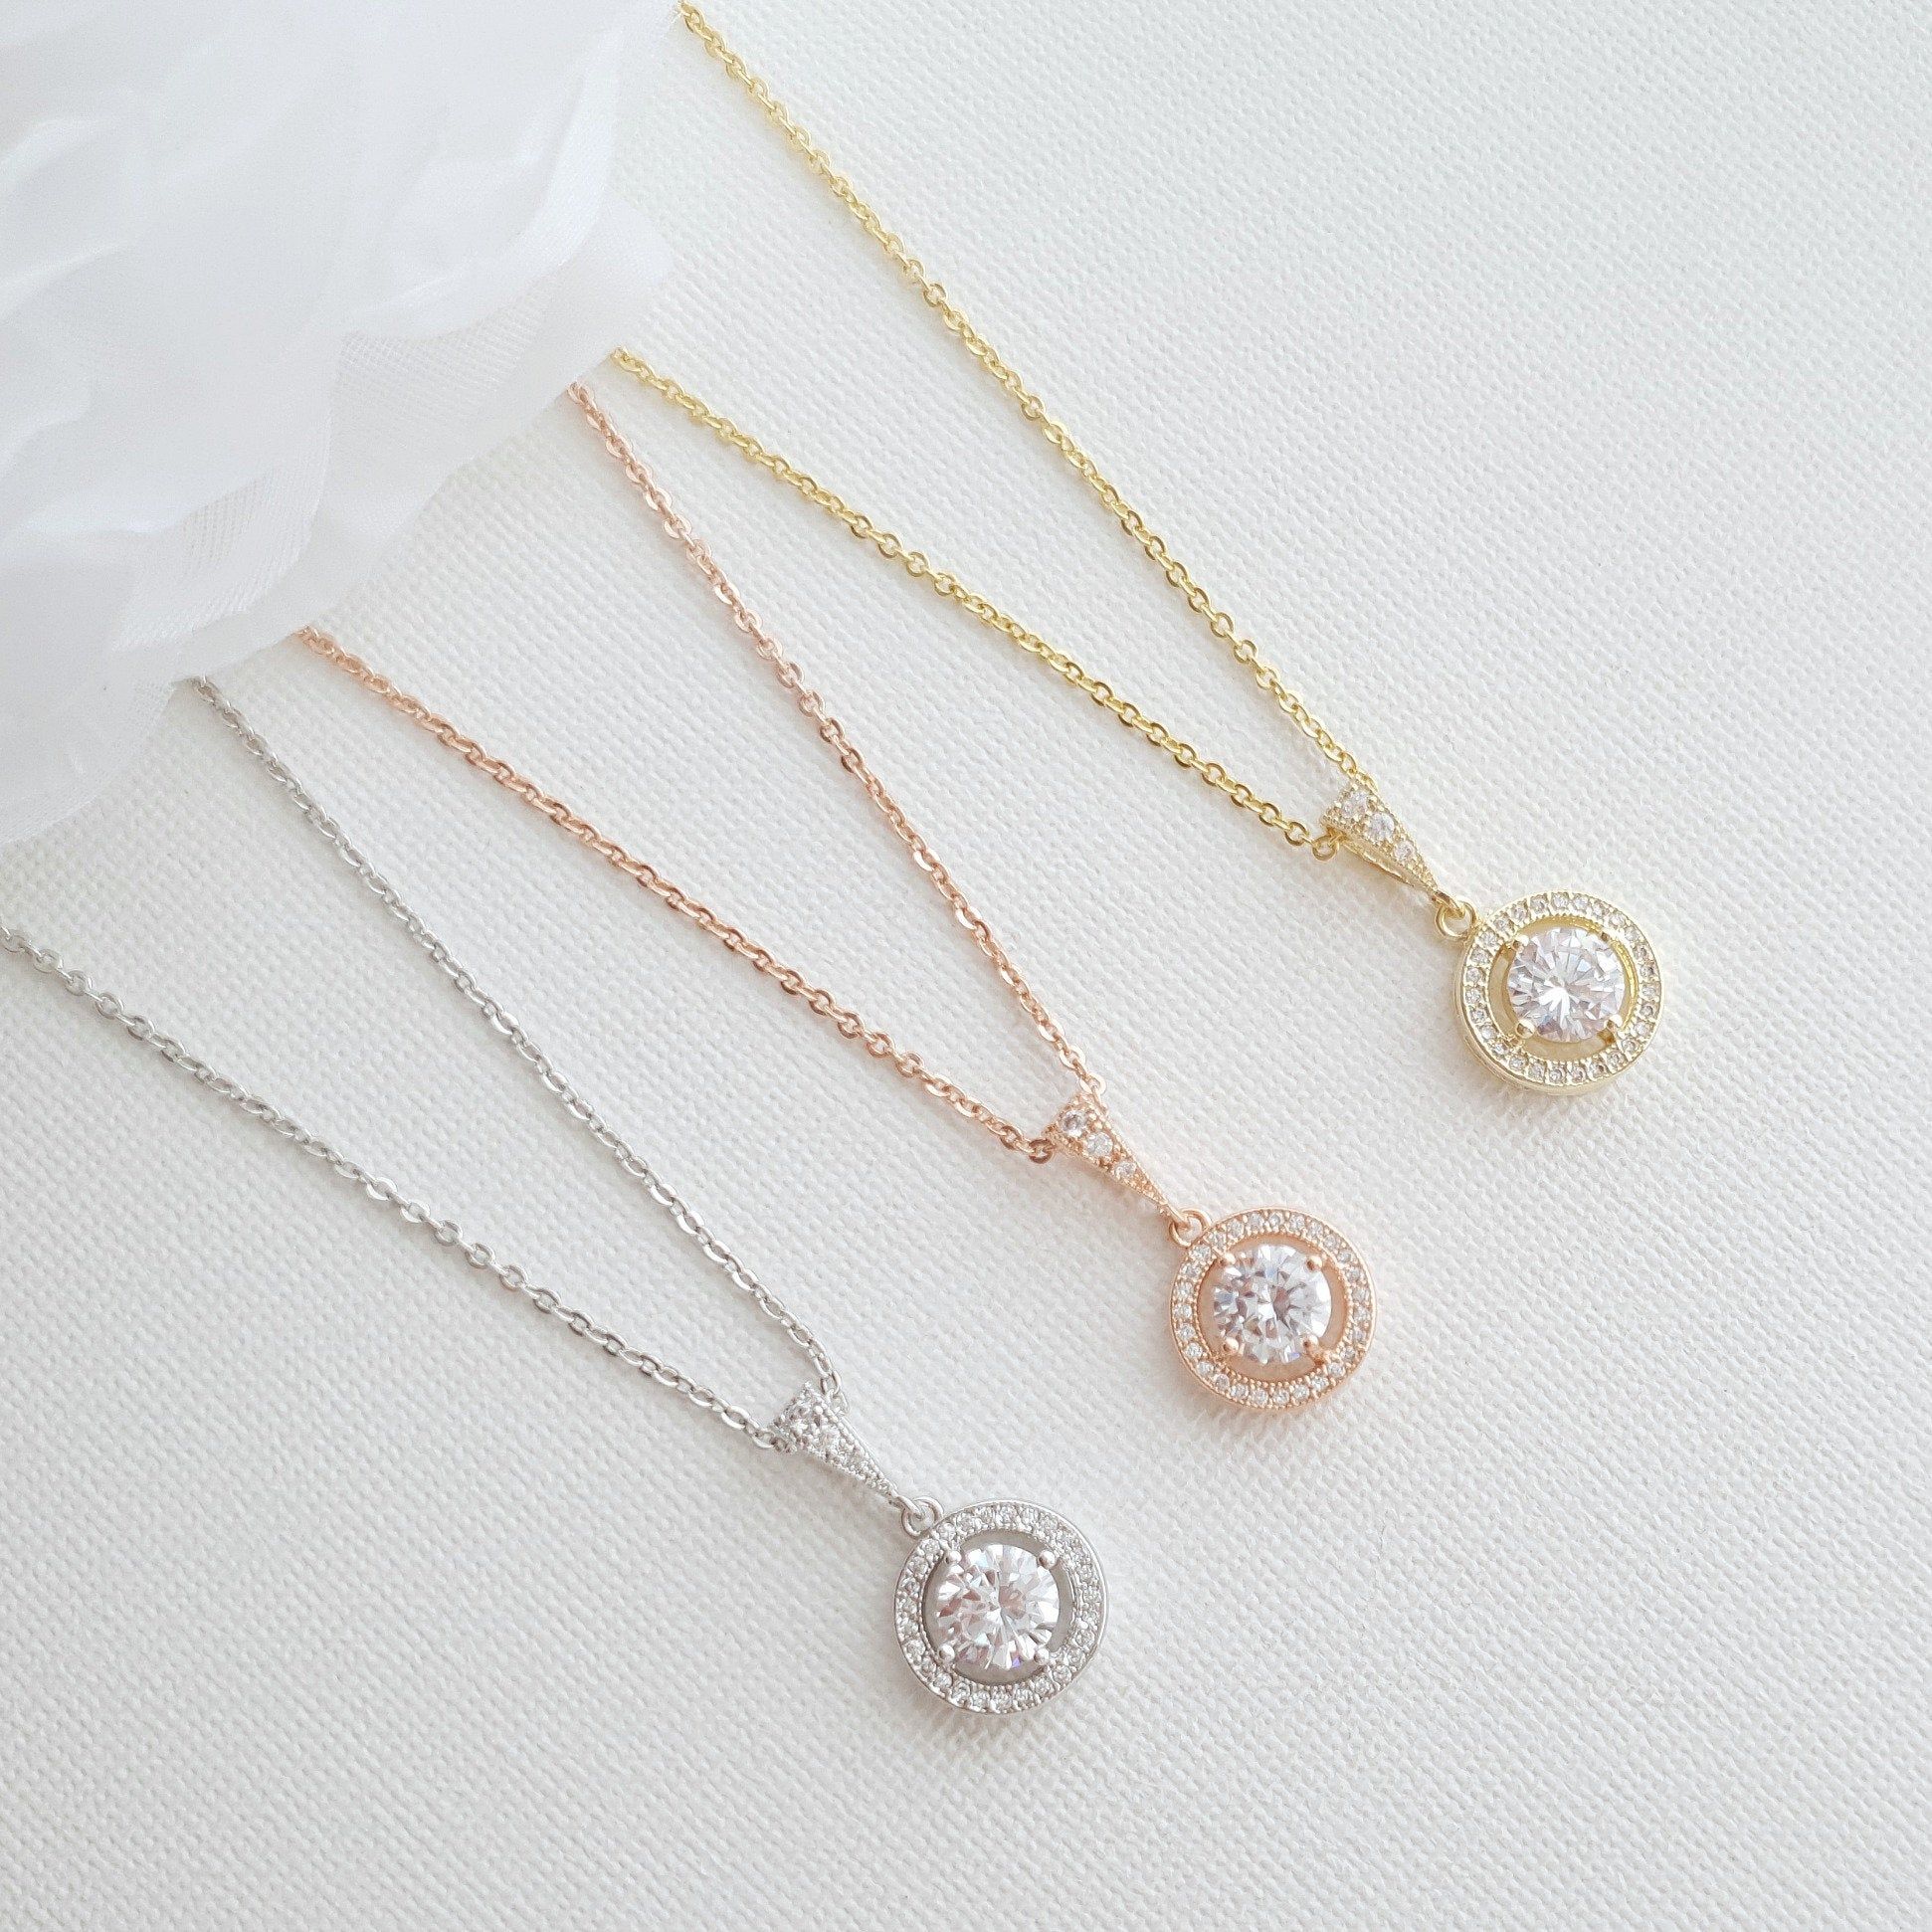 Crystal Bridal Pendant, Round Halo Wedding Pendant Necklace, Rose Gold  Bridesmaid Necklace, Small Gold Pendant For Brides, Denise For Most Popular Round Sparkle Halo Necklaces (View 18 of 25)